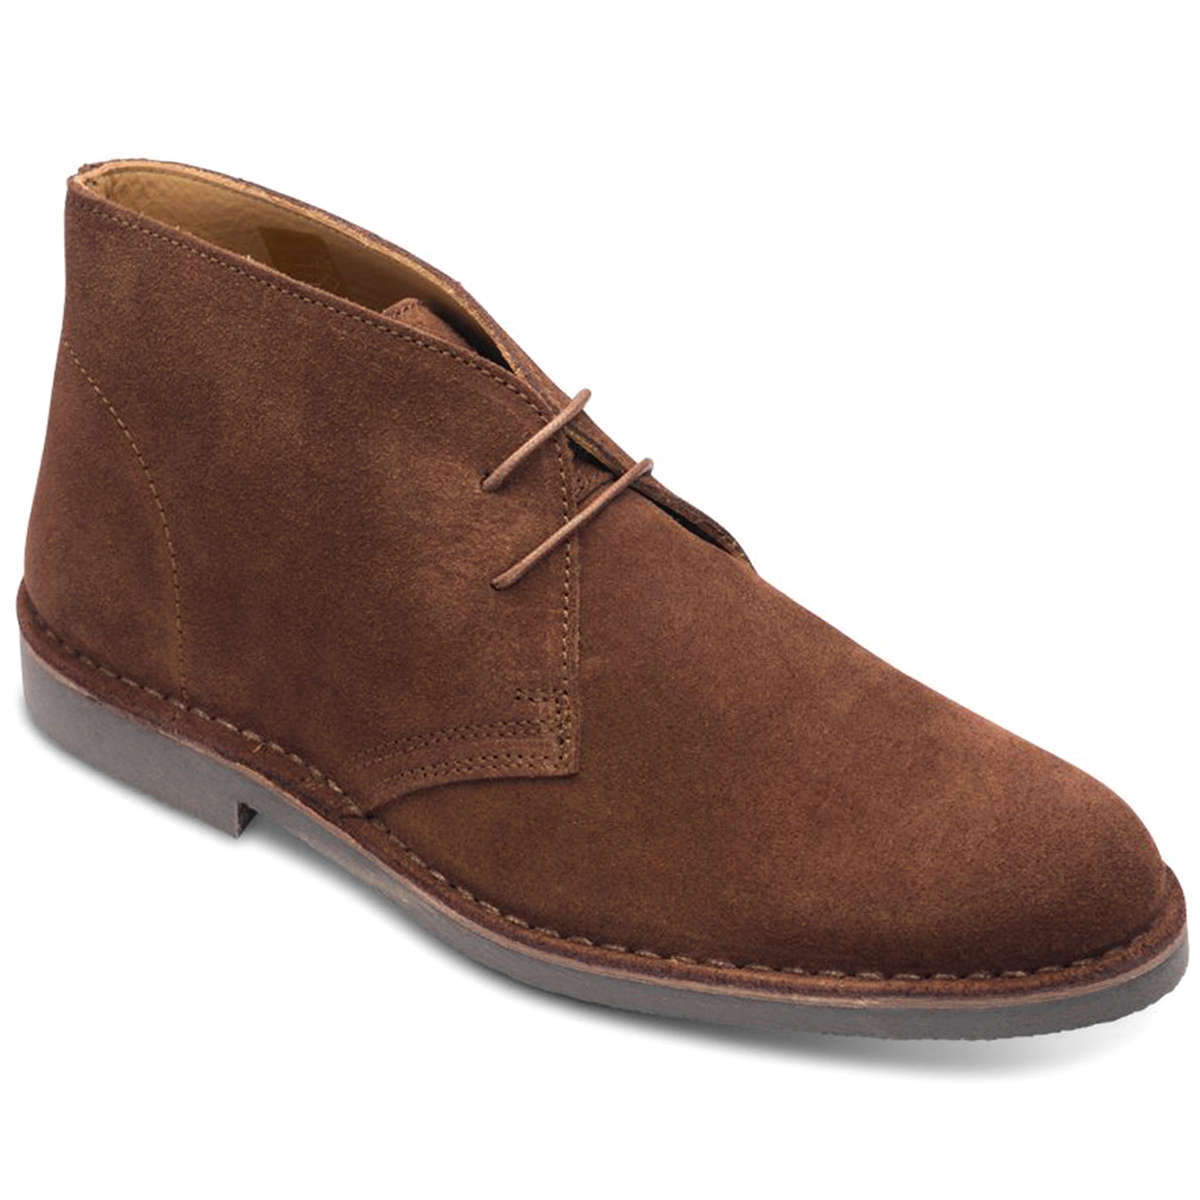 Loake Sahara Suede Leather Men's Desert Boots